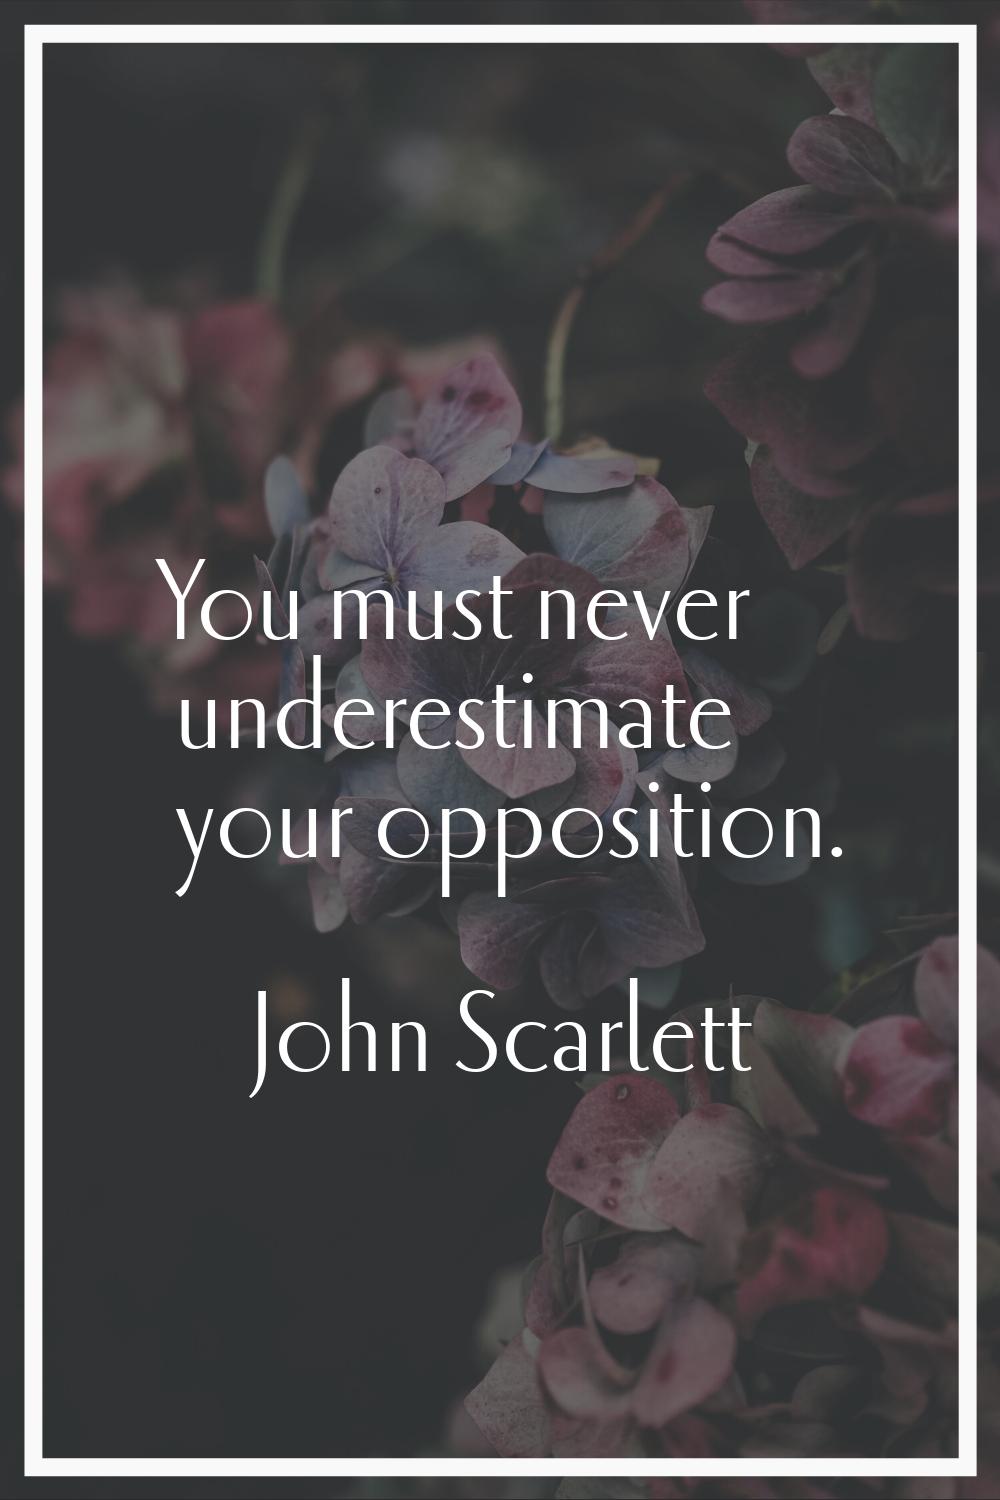 You must never underestimate your opposition.